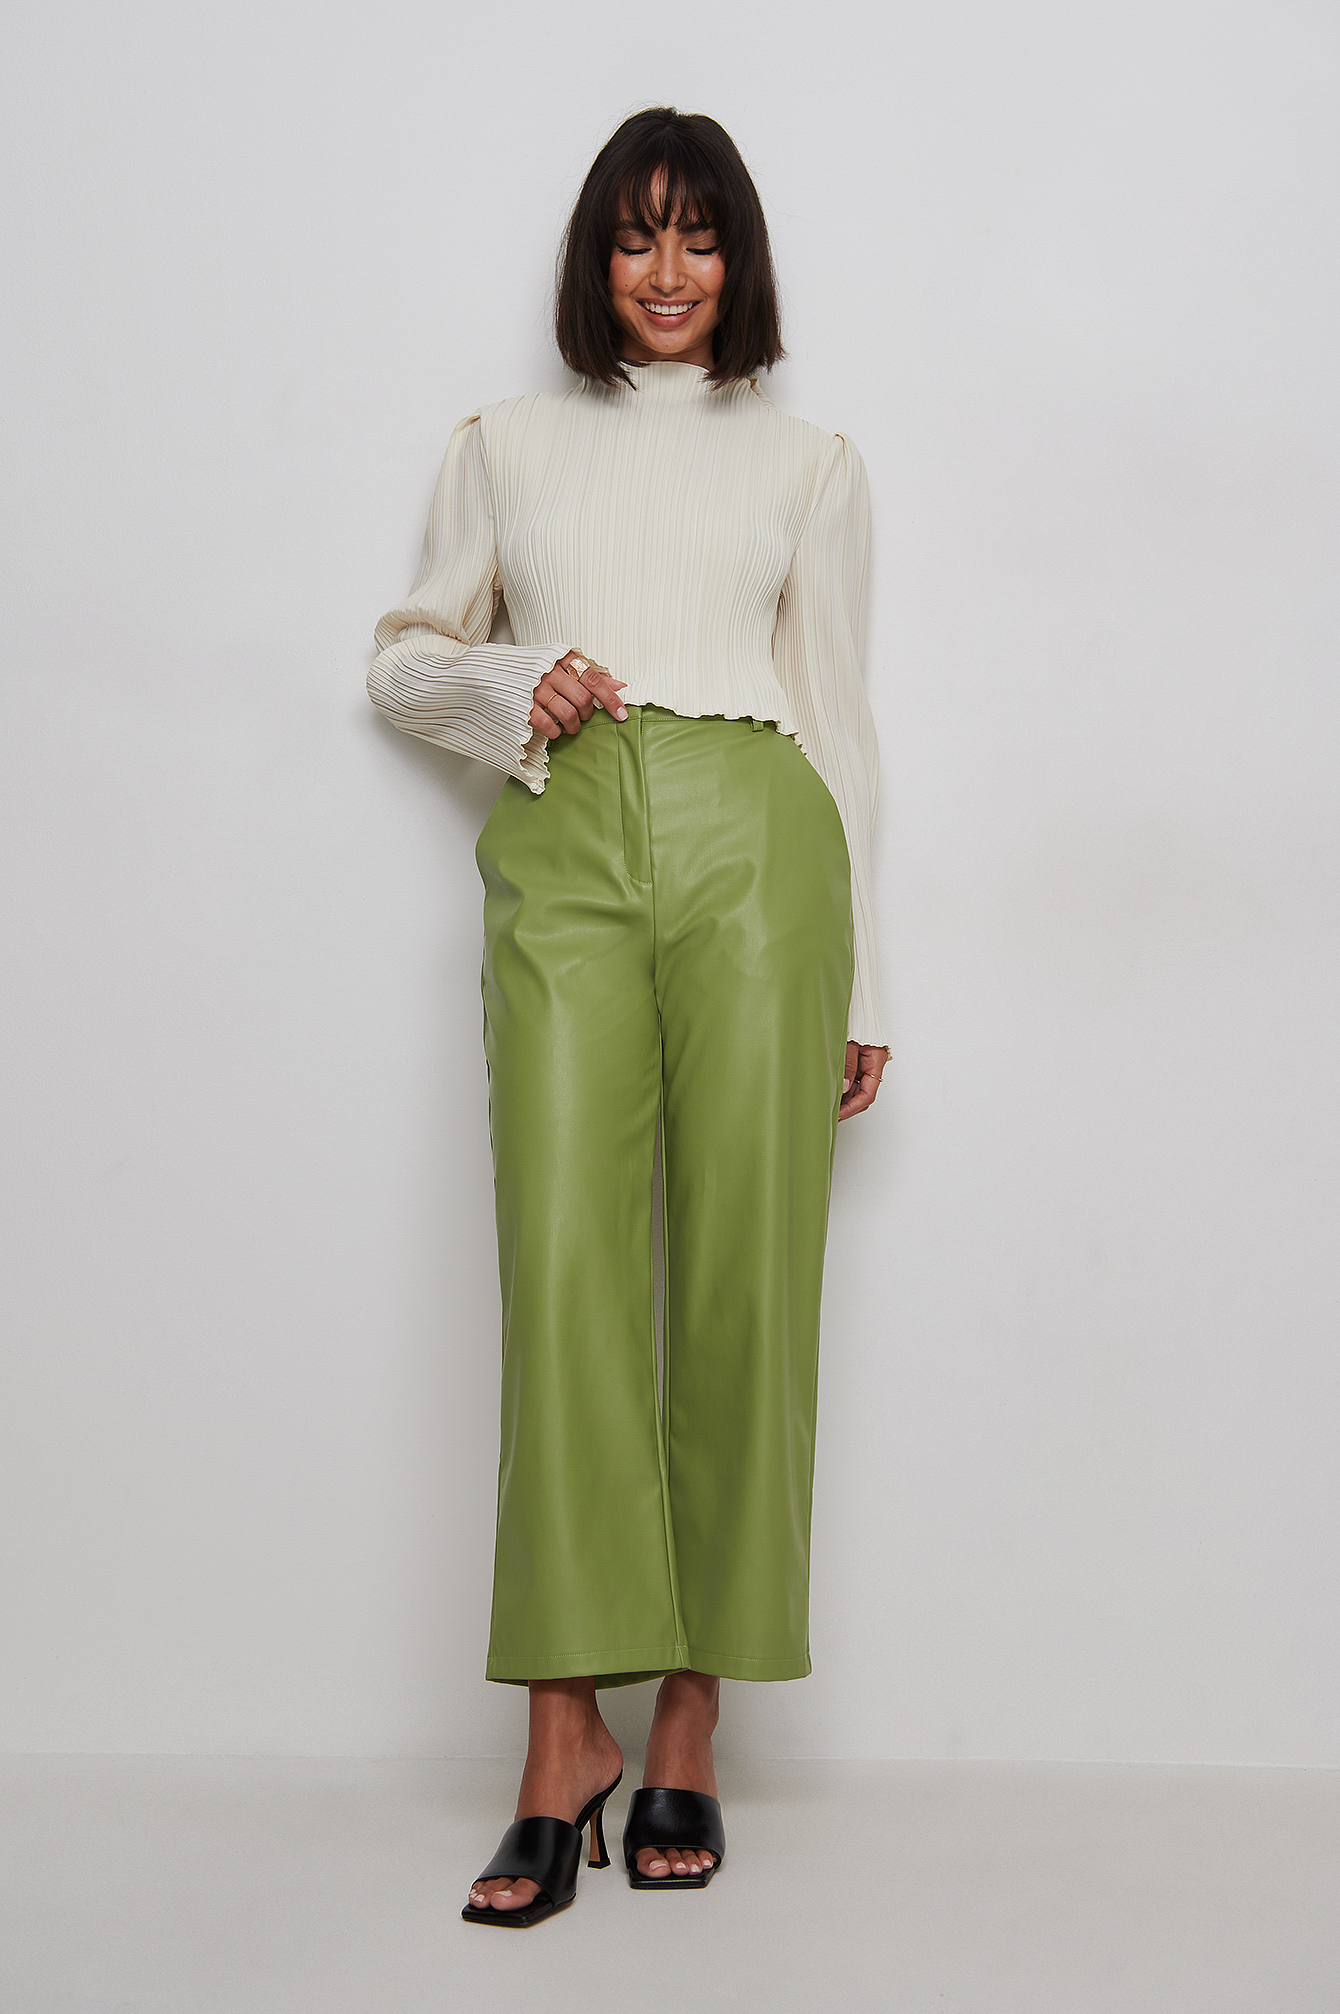 PU Cropped Pants Outfit.